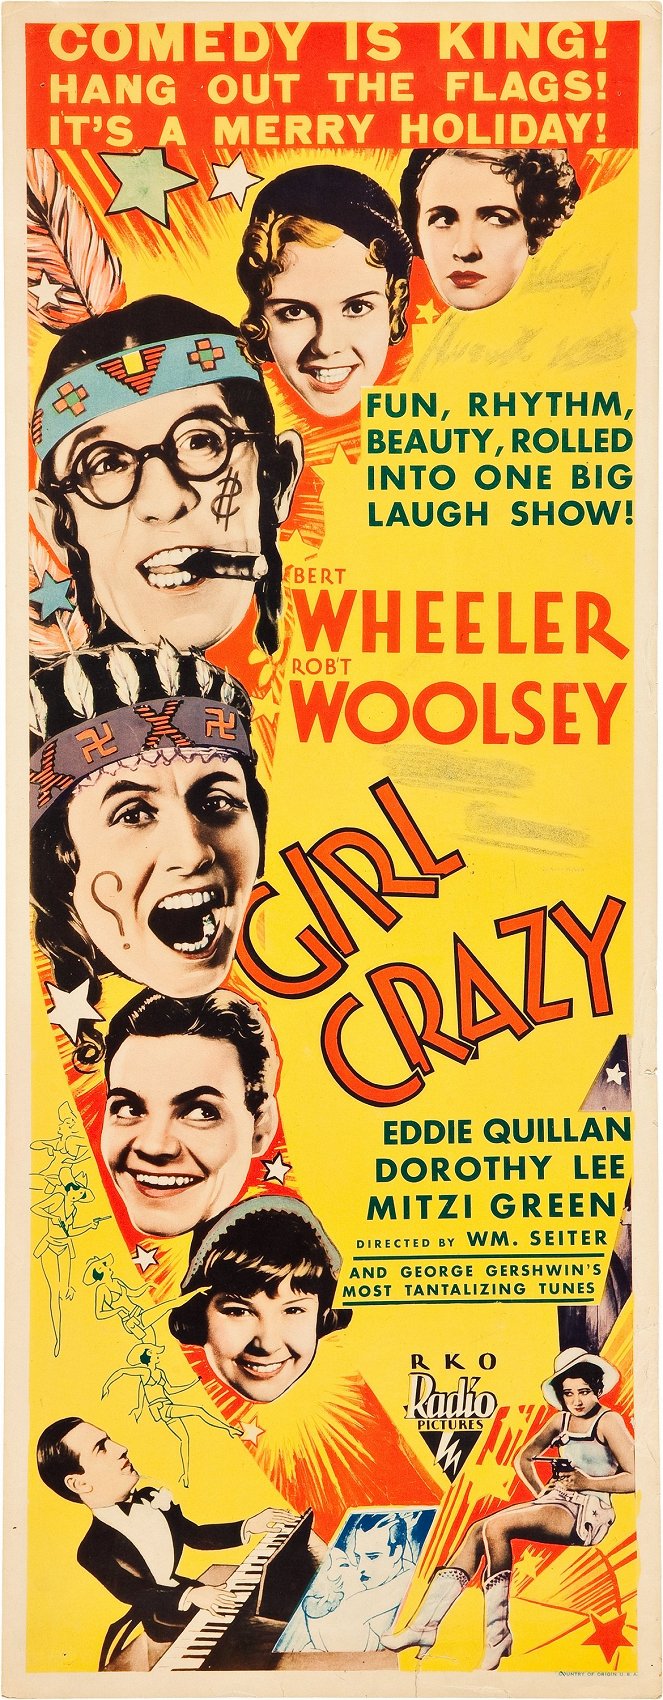 Girl Crazy - Posters